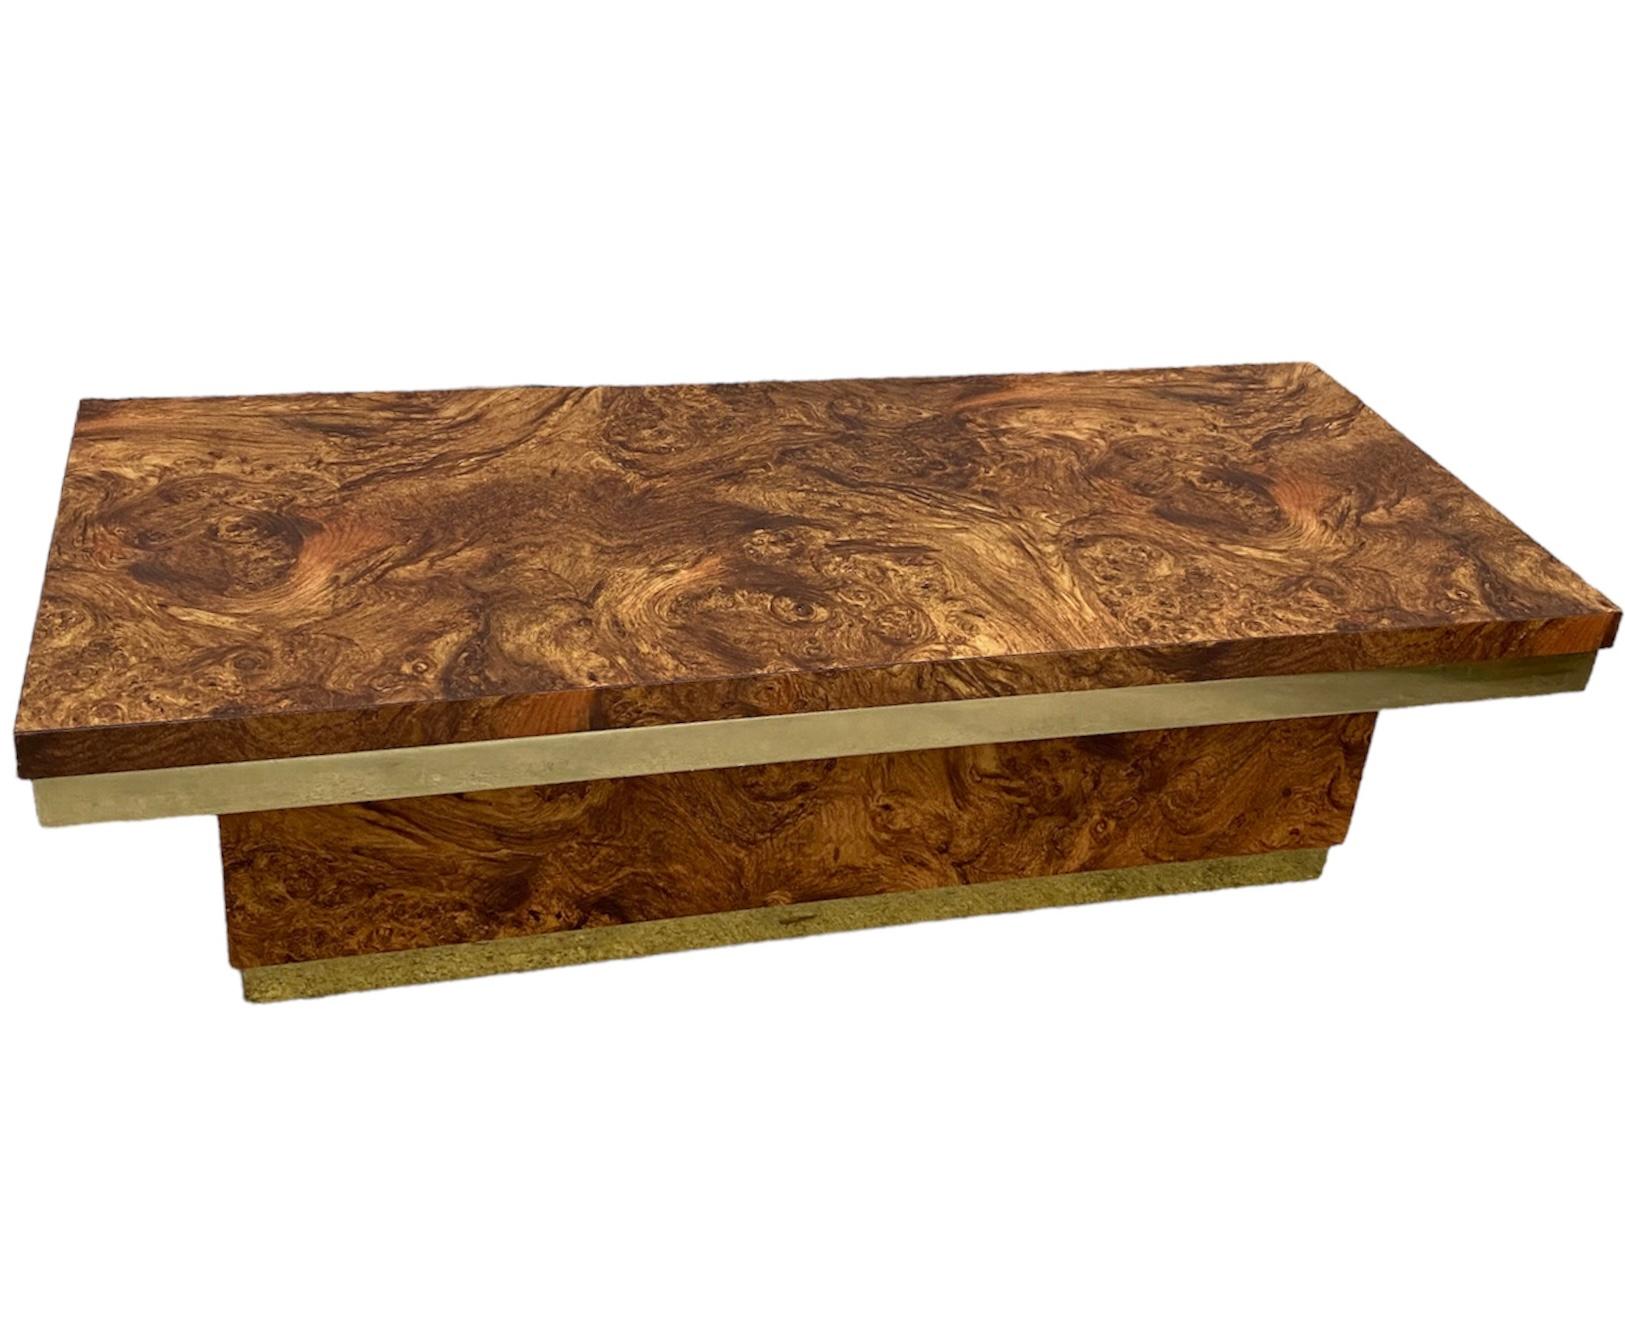 This beautiful midcentury coffee table features stunning burl wood panels and brass accents. This piece will fit perfectly in any contemporary or midcentury style space. Laminate is very durable and perfect for those who entertain often! 